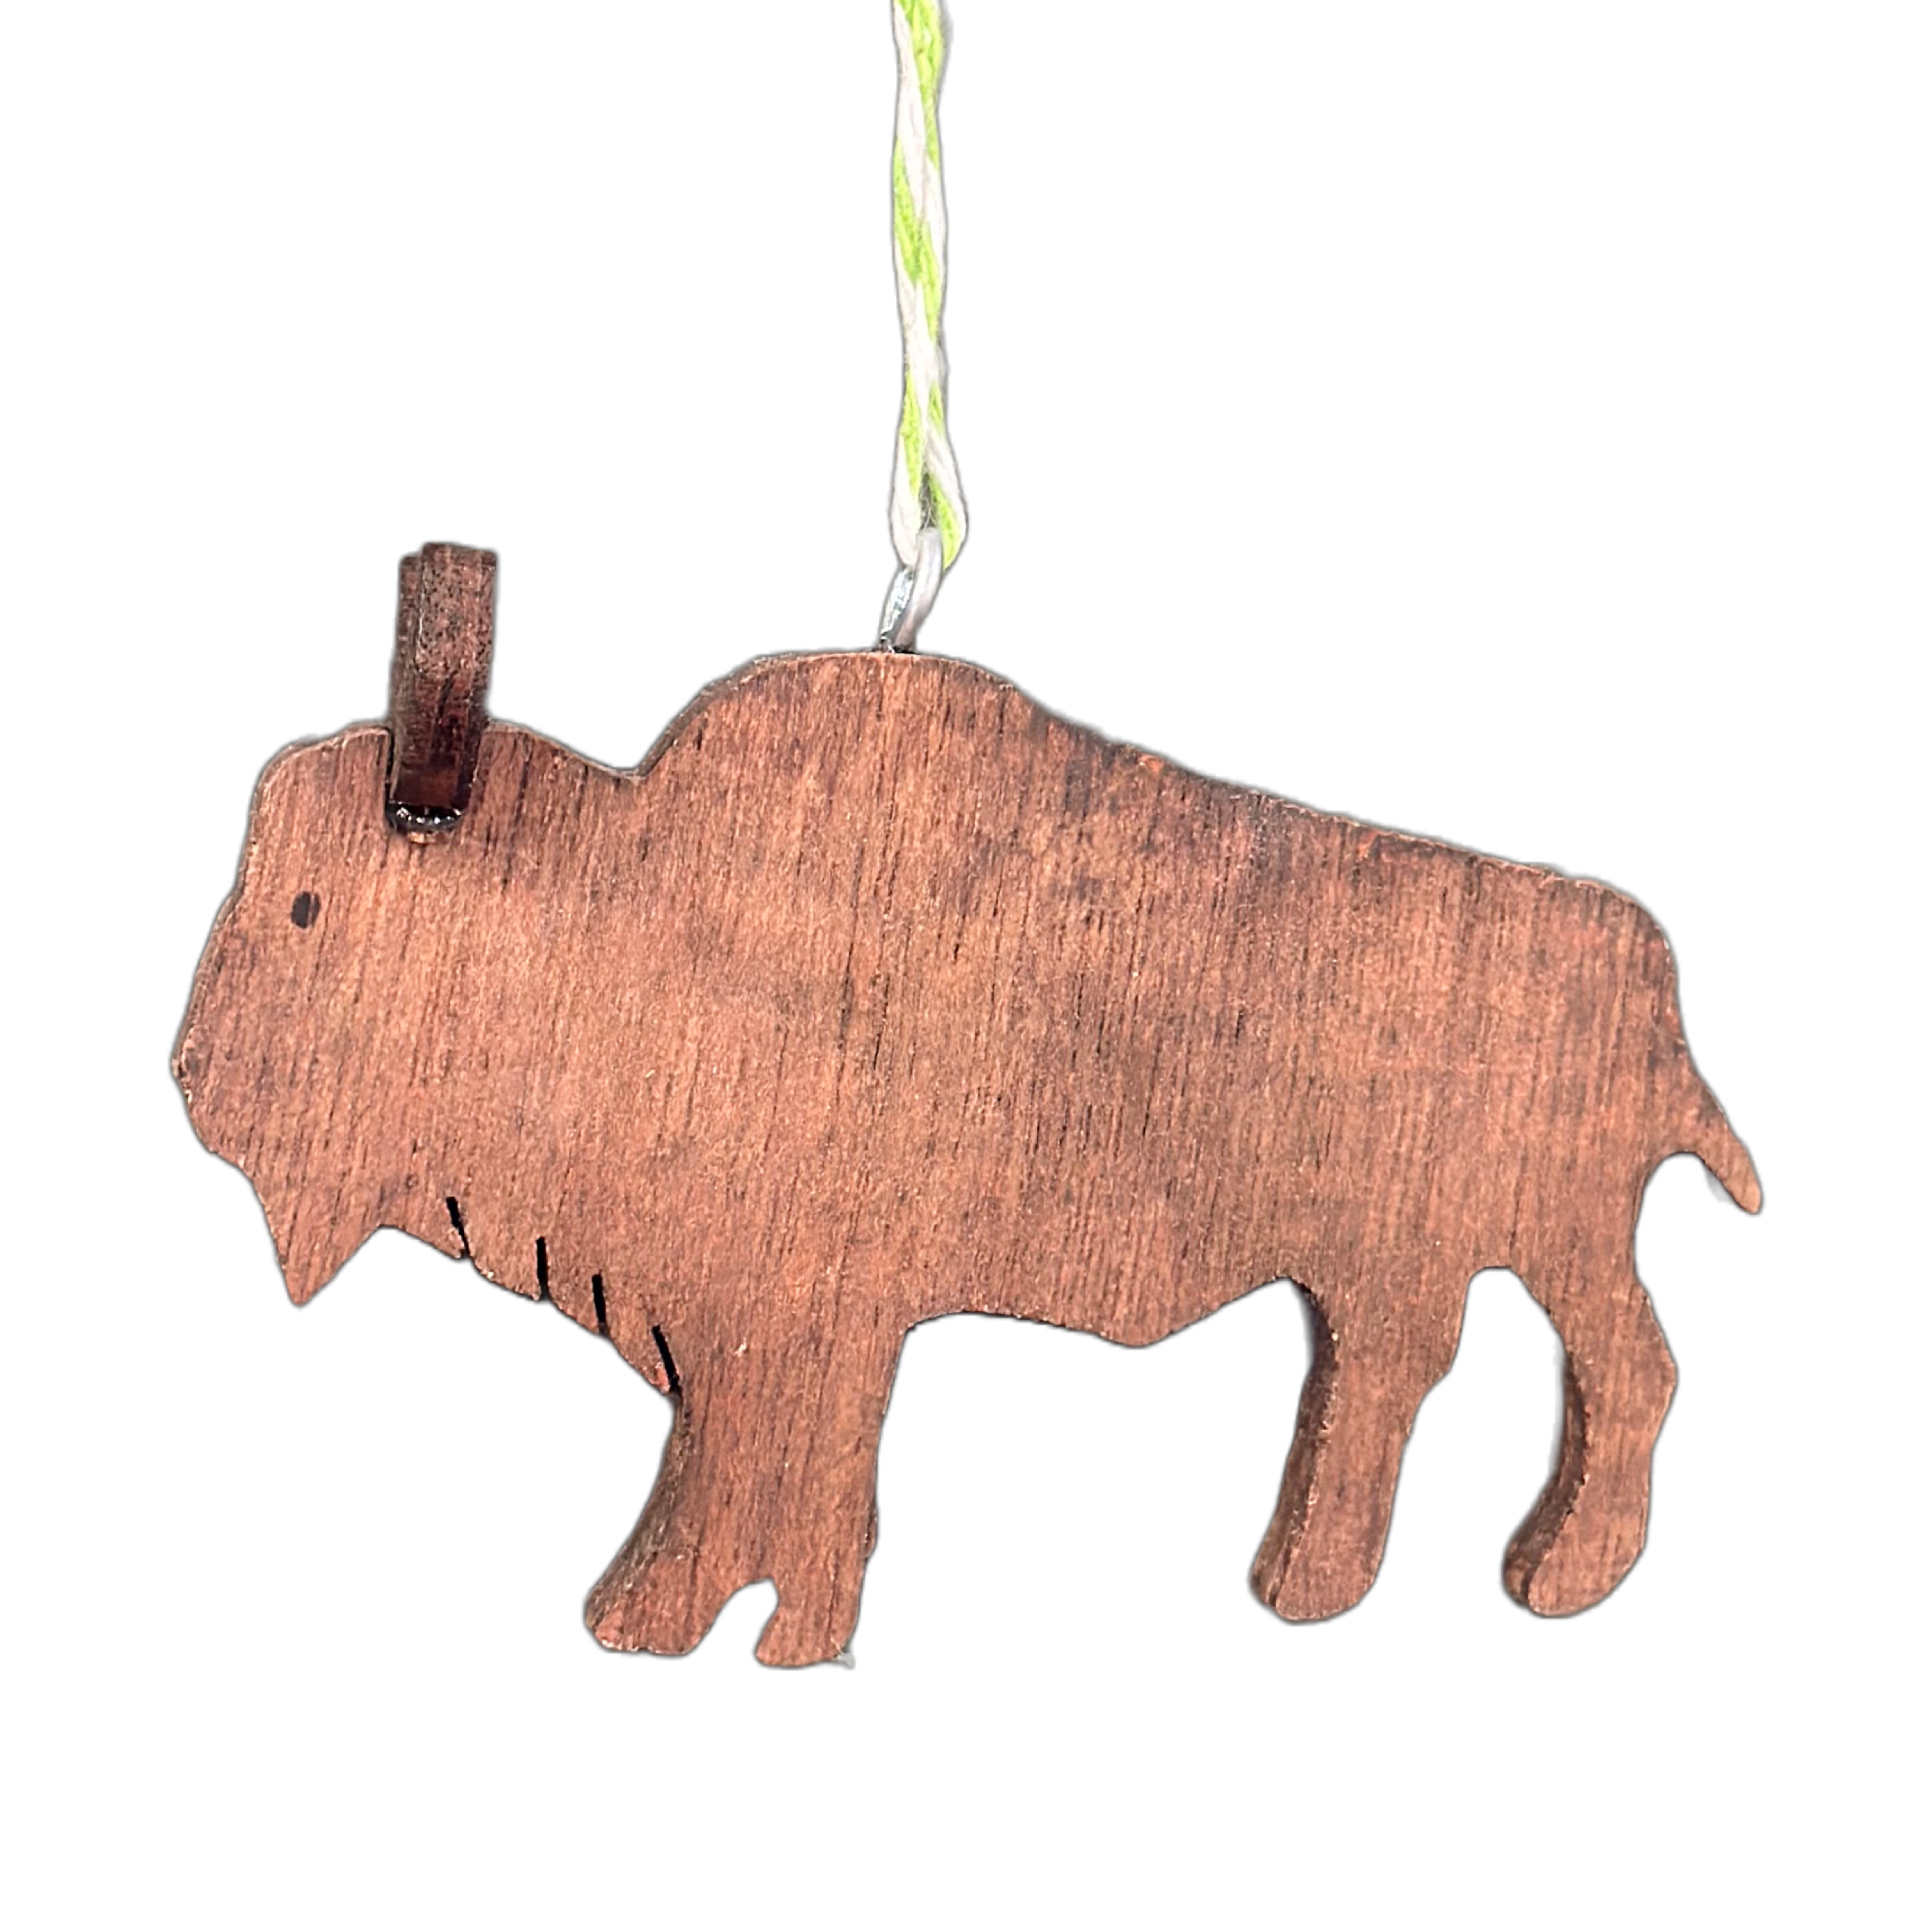 Hand Crafted Wood Bison Ornament